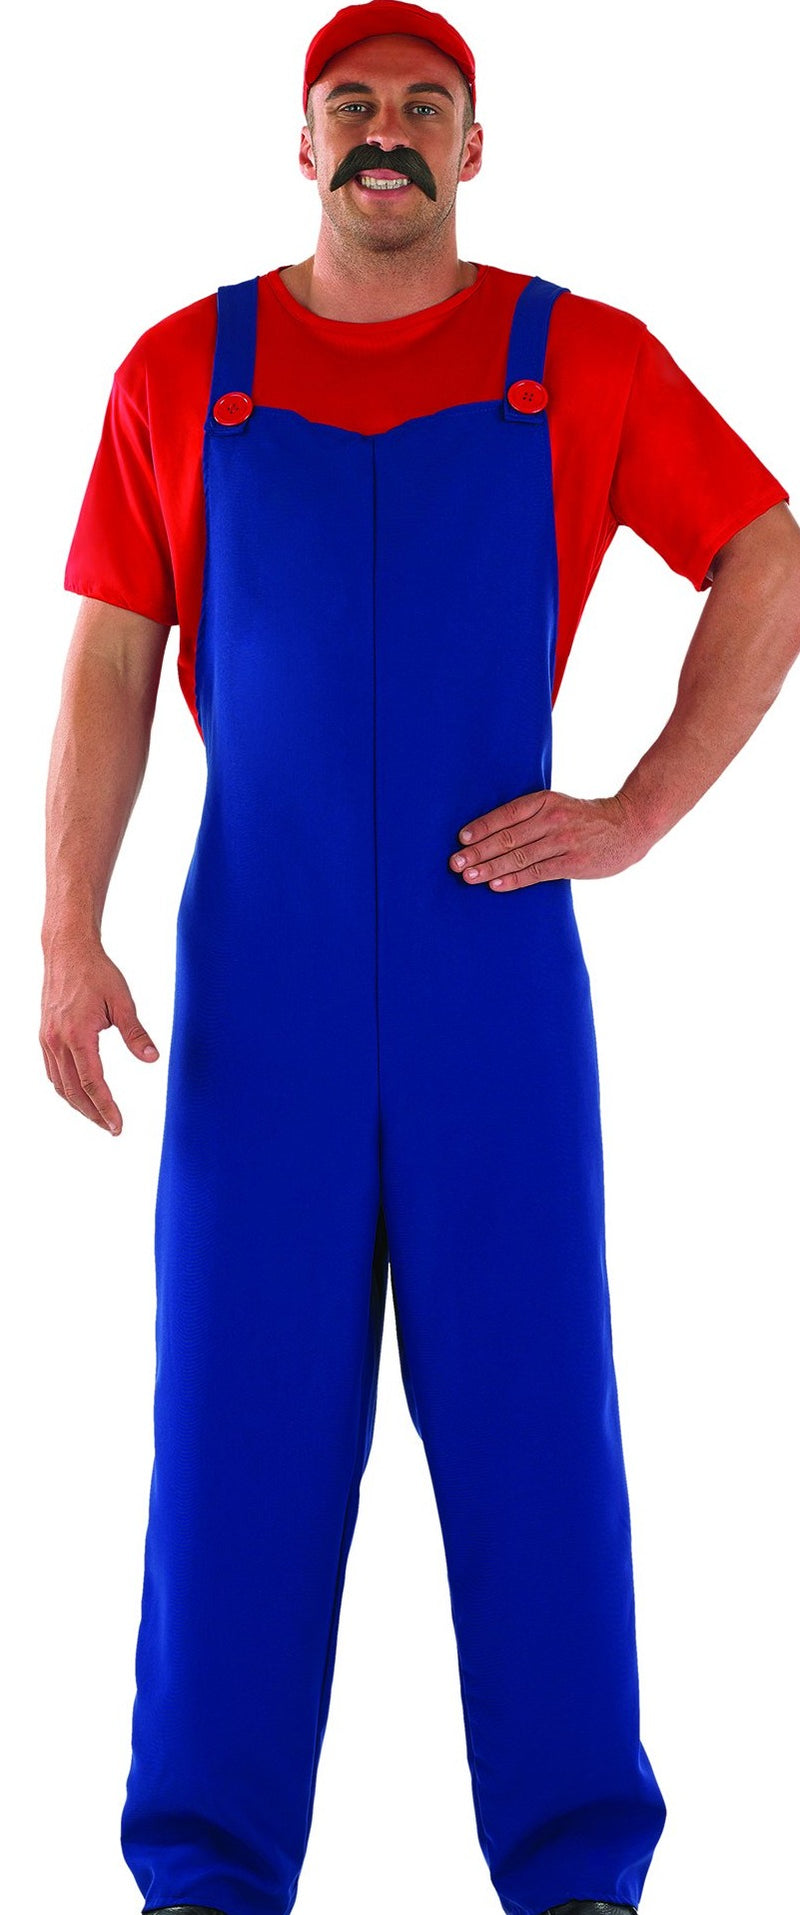 Super Mario Plumber Mate Fancy Dress Outfit